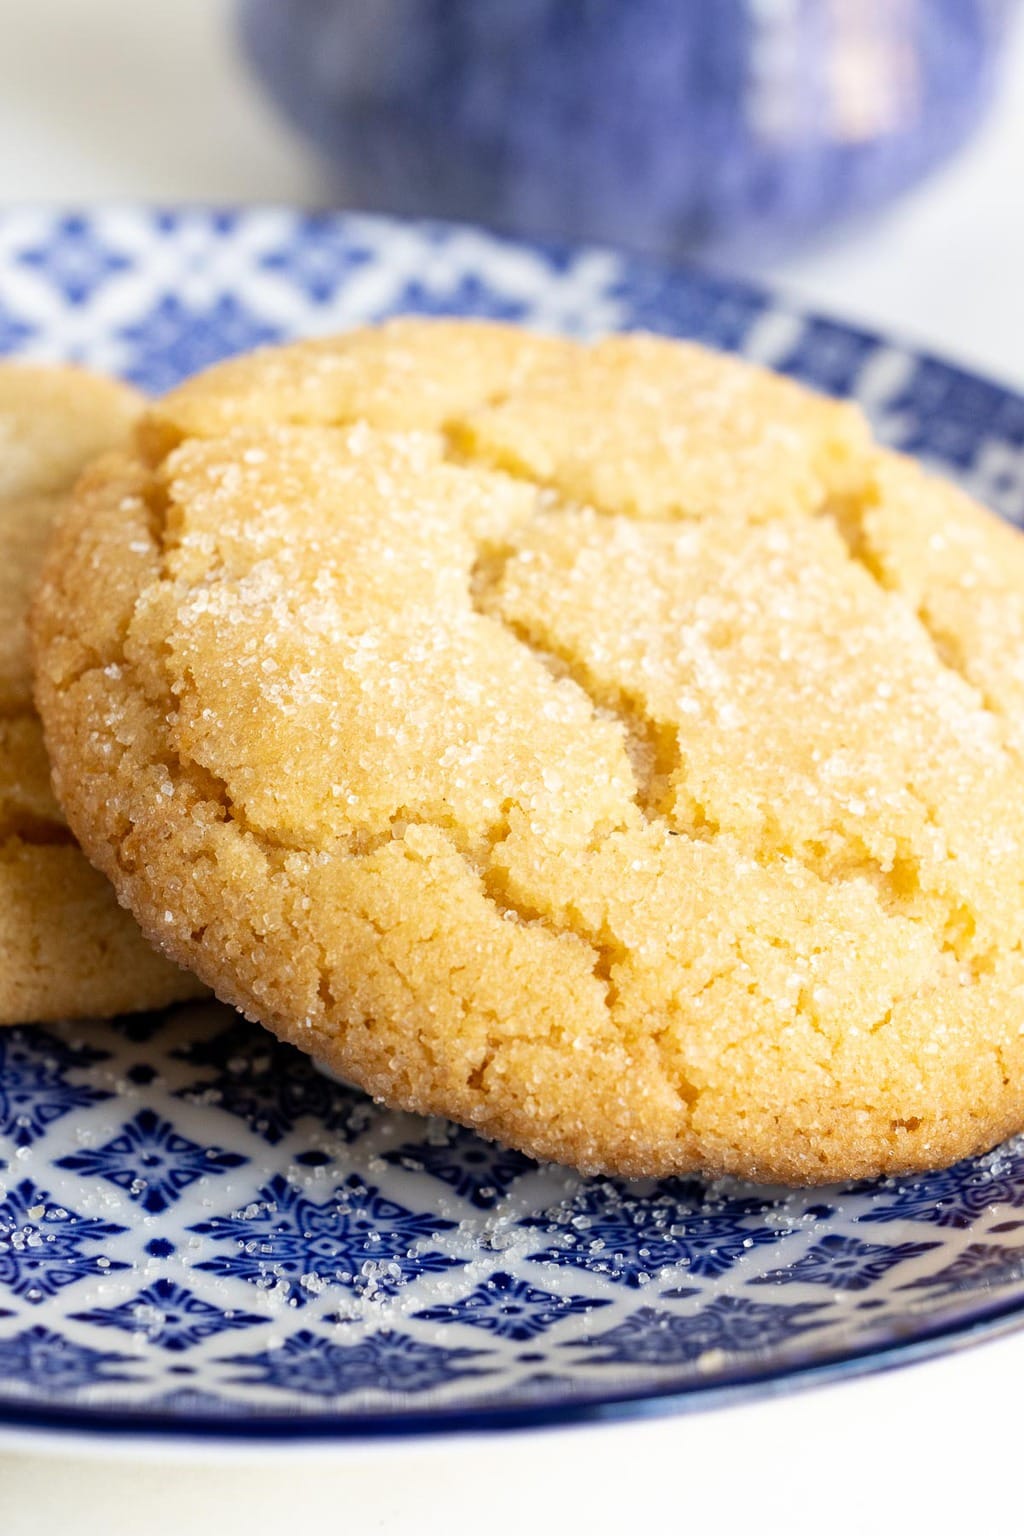 Vertical extreme closeup photo of a Crinkly Crackly Lemon Sugar Cookie on a blue and white patterned plate.